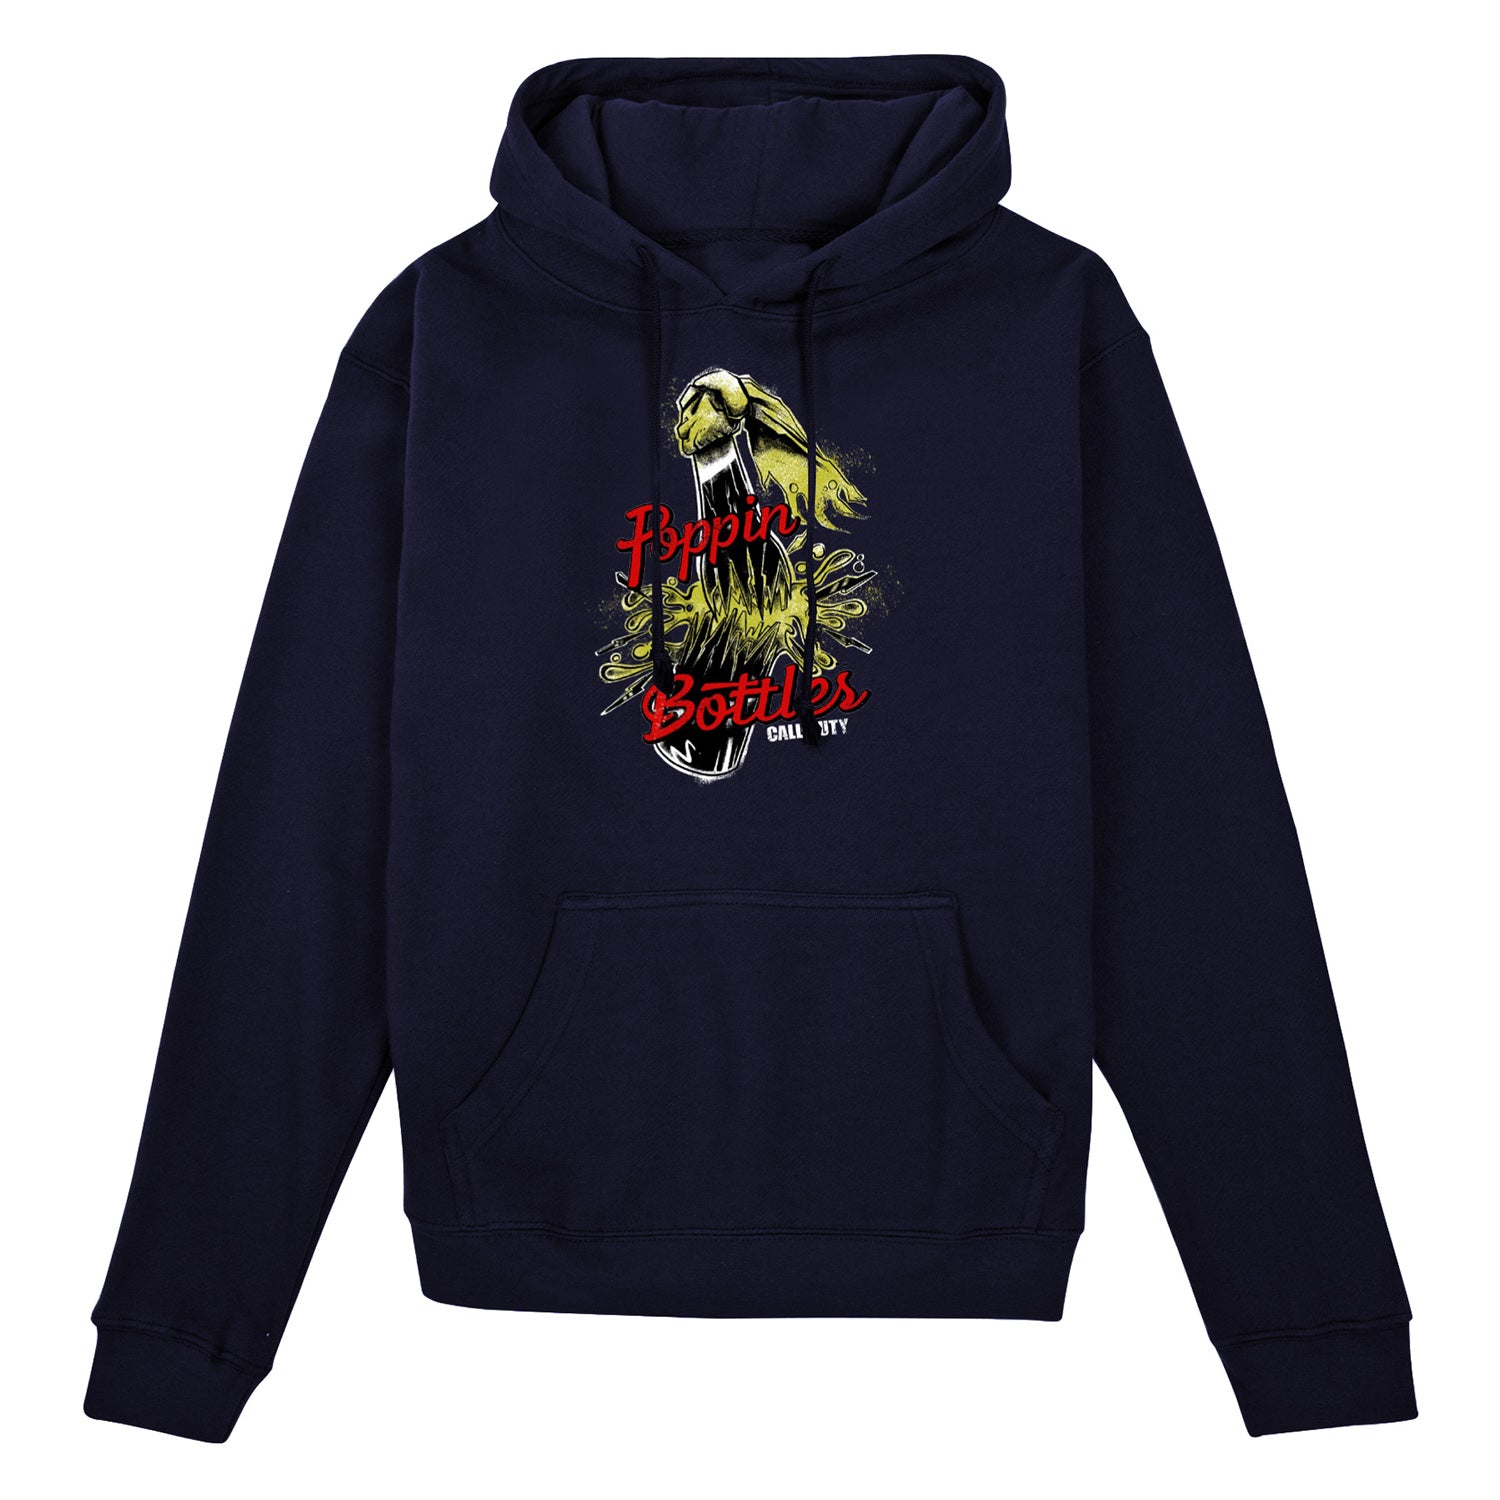 Call of Duty Navy Poppin' Bottles Hoodie - Front View